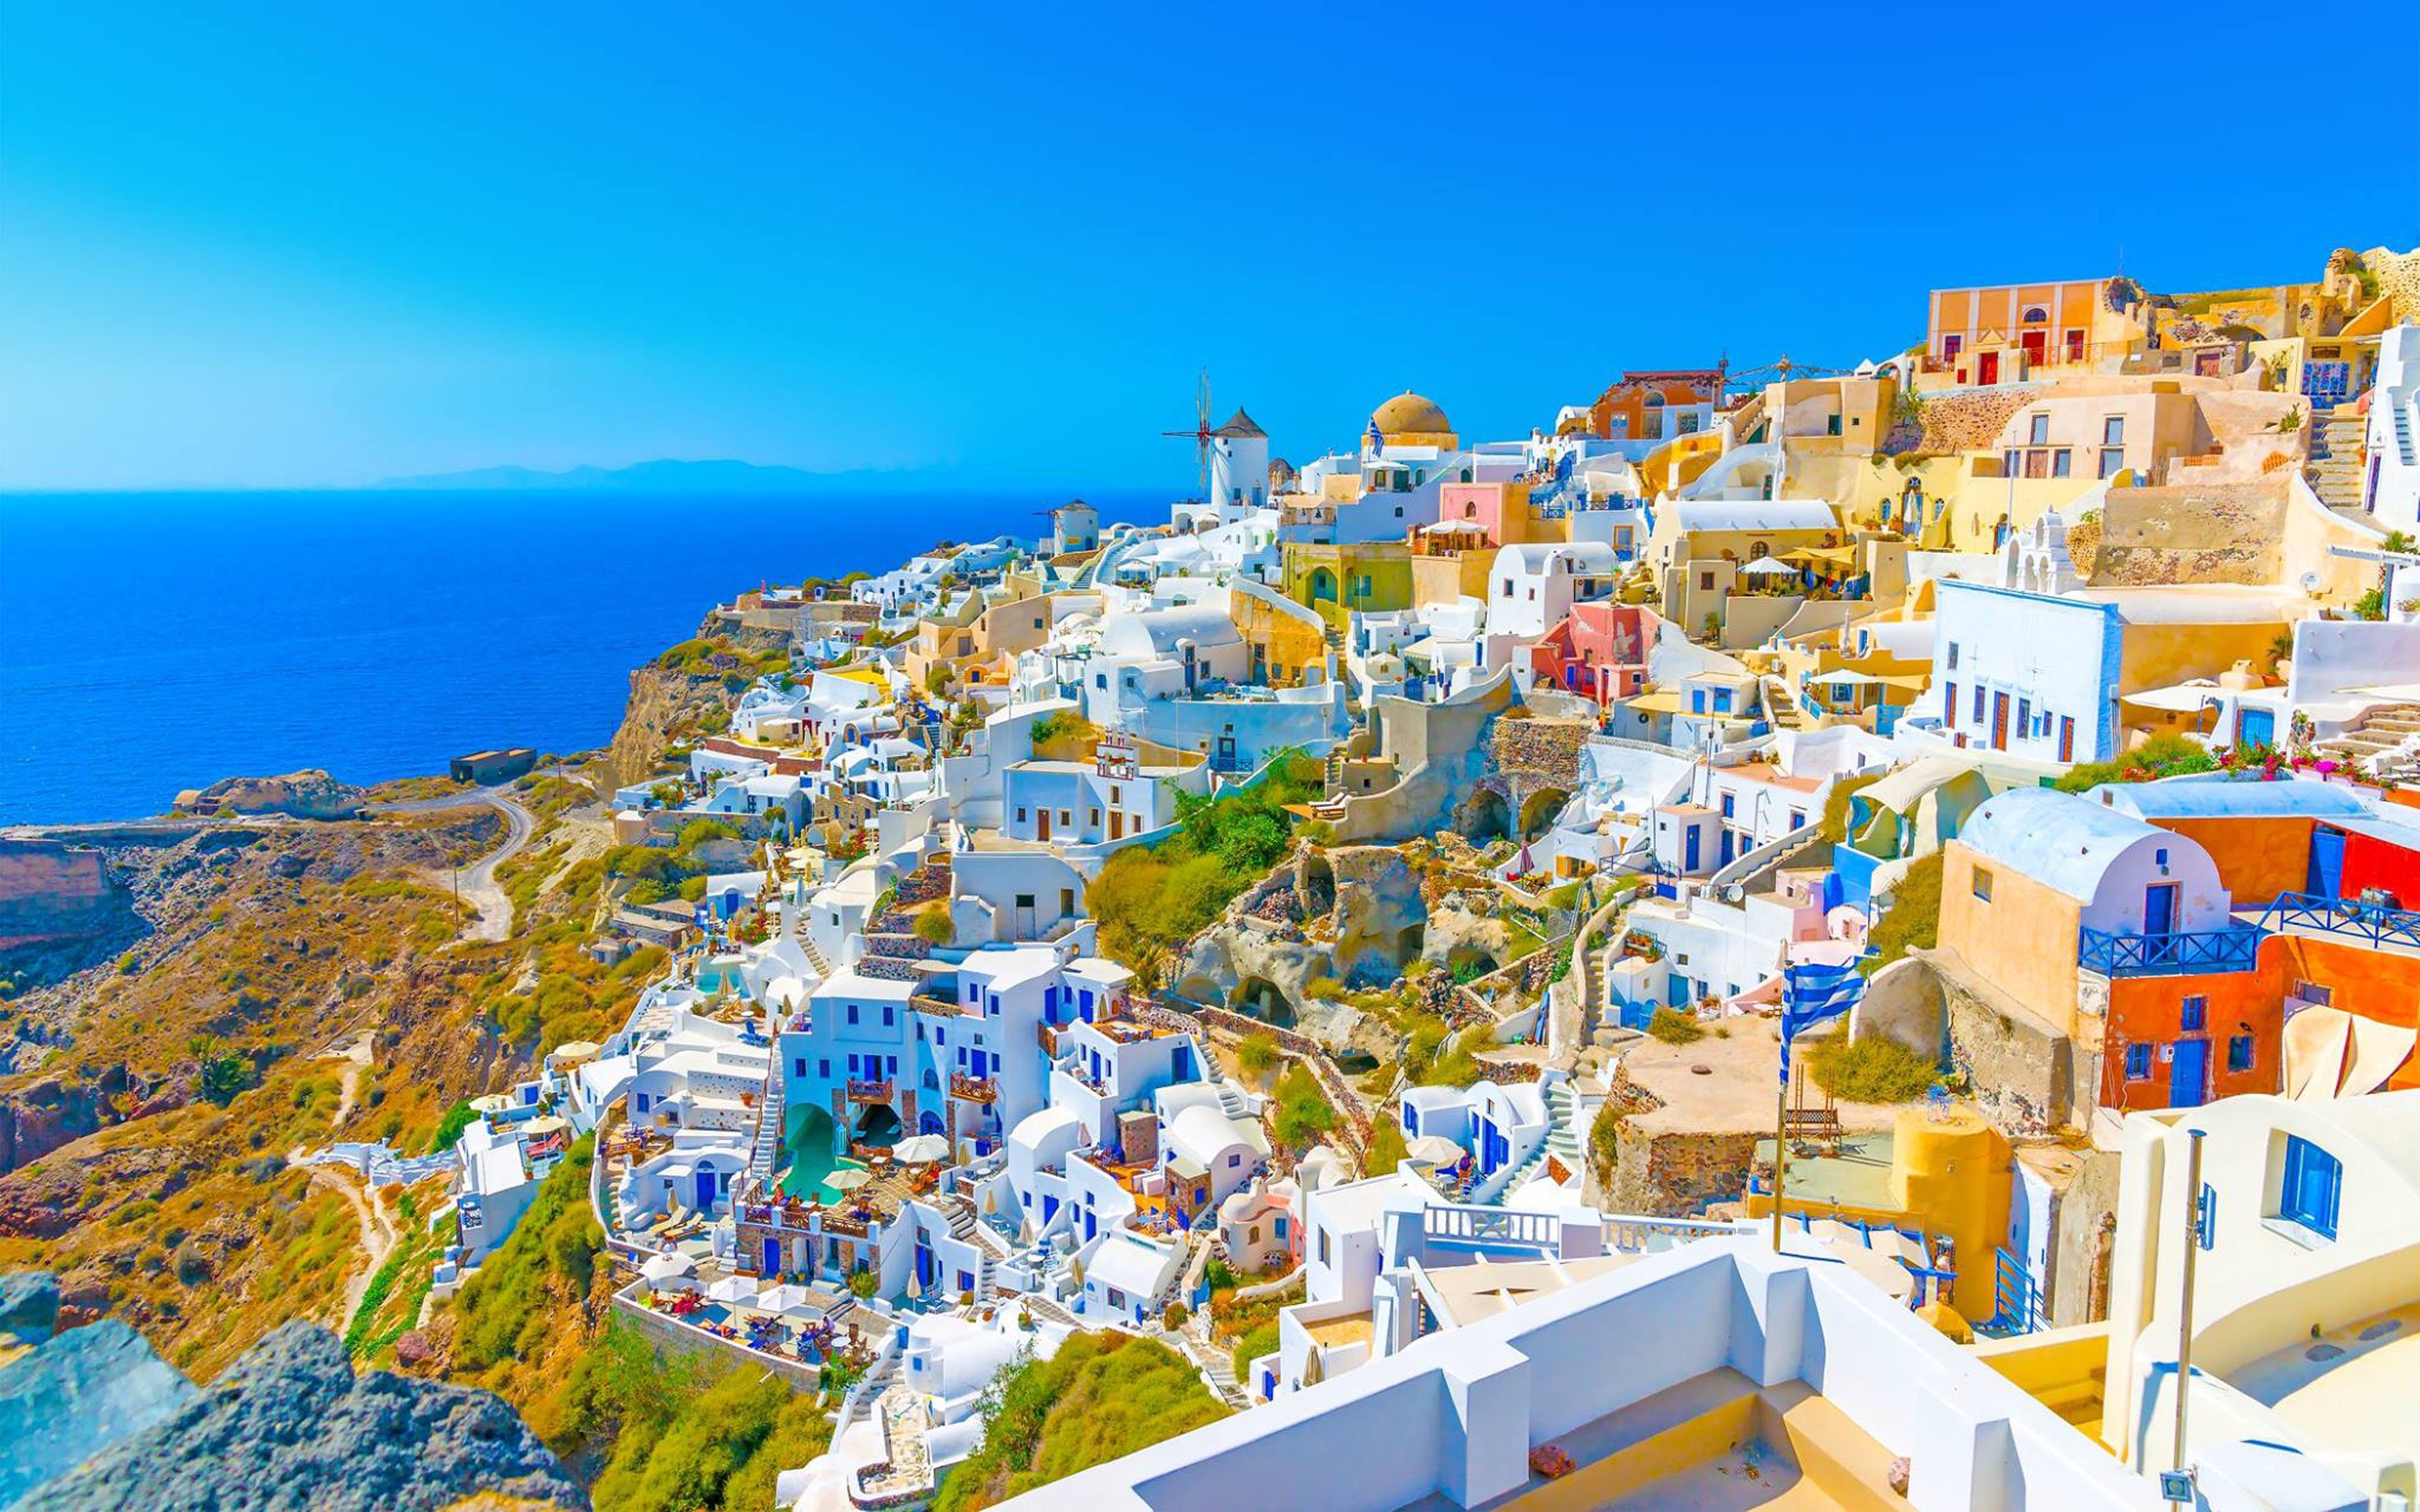 Aegean Sea Santorini Island Greece Capitals Fira I Oya Place Of One Of The  Largest Volcanic Eruptions In The World 4K wallpaper